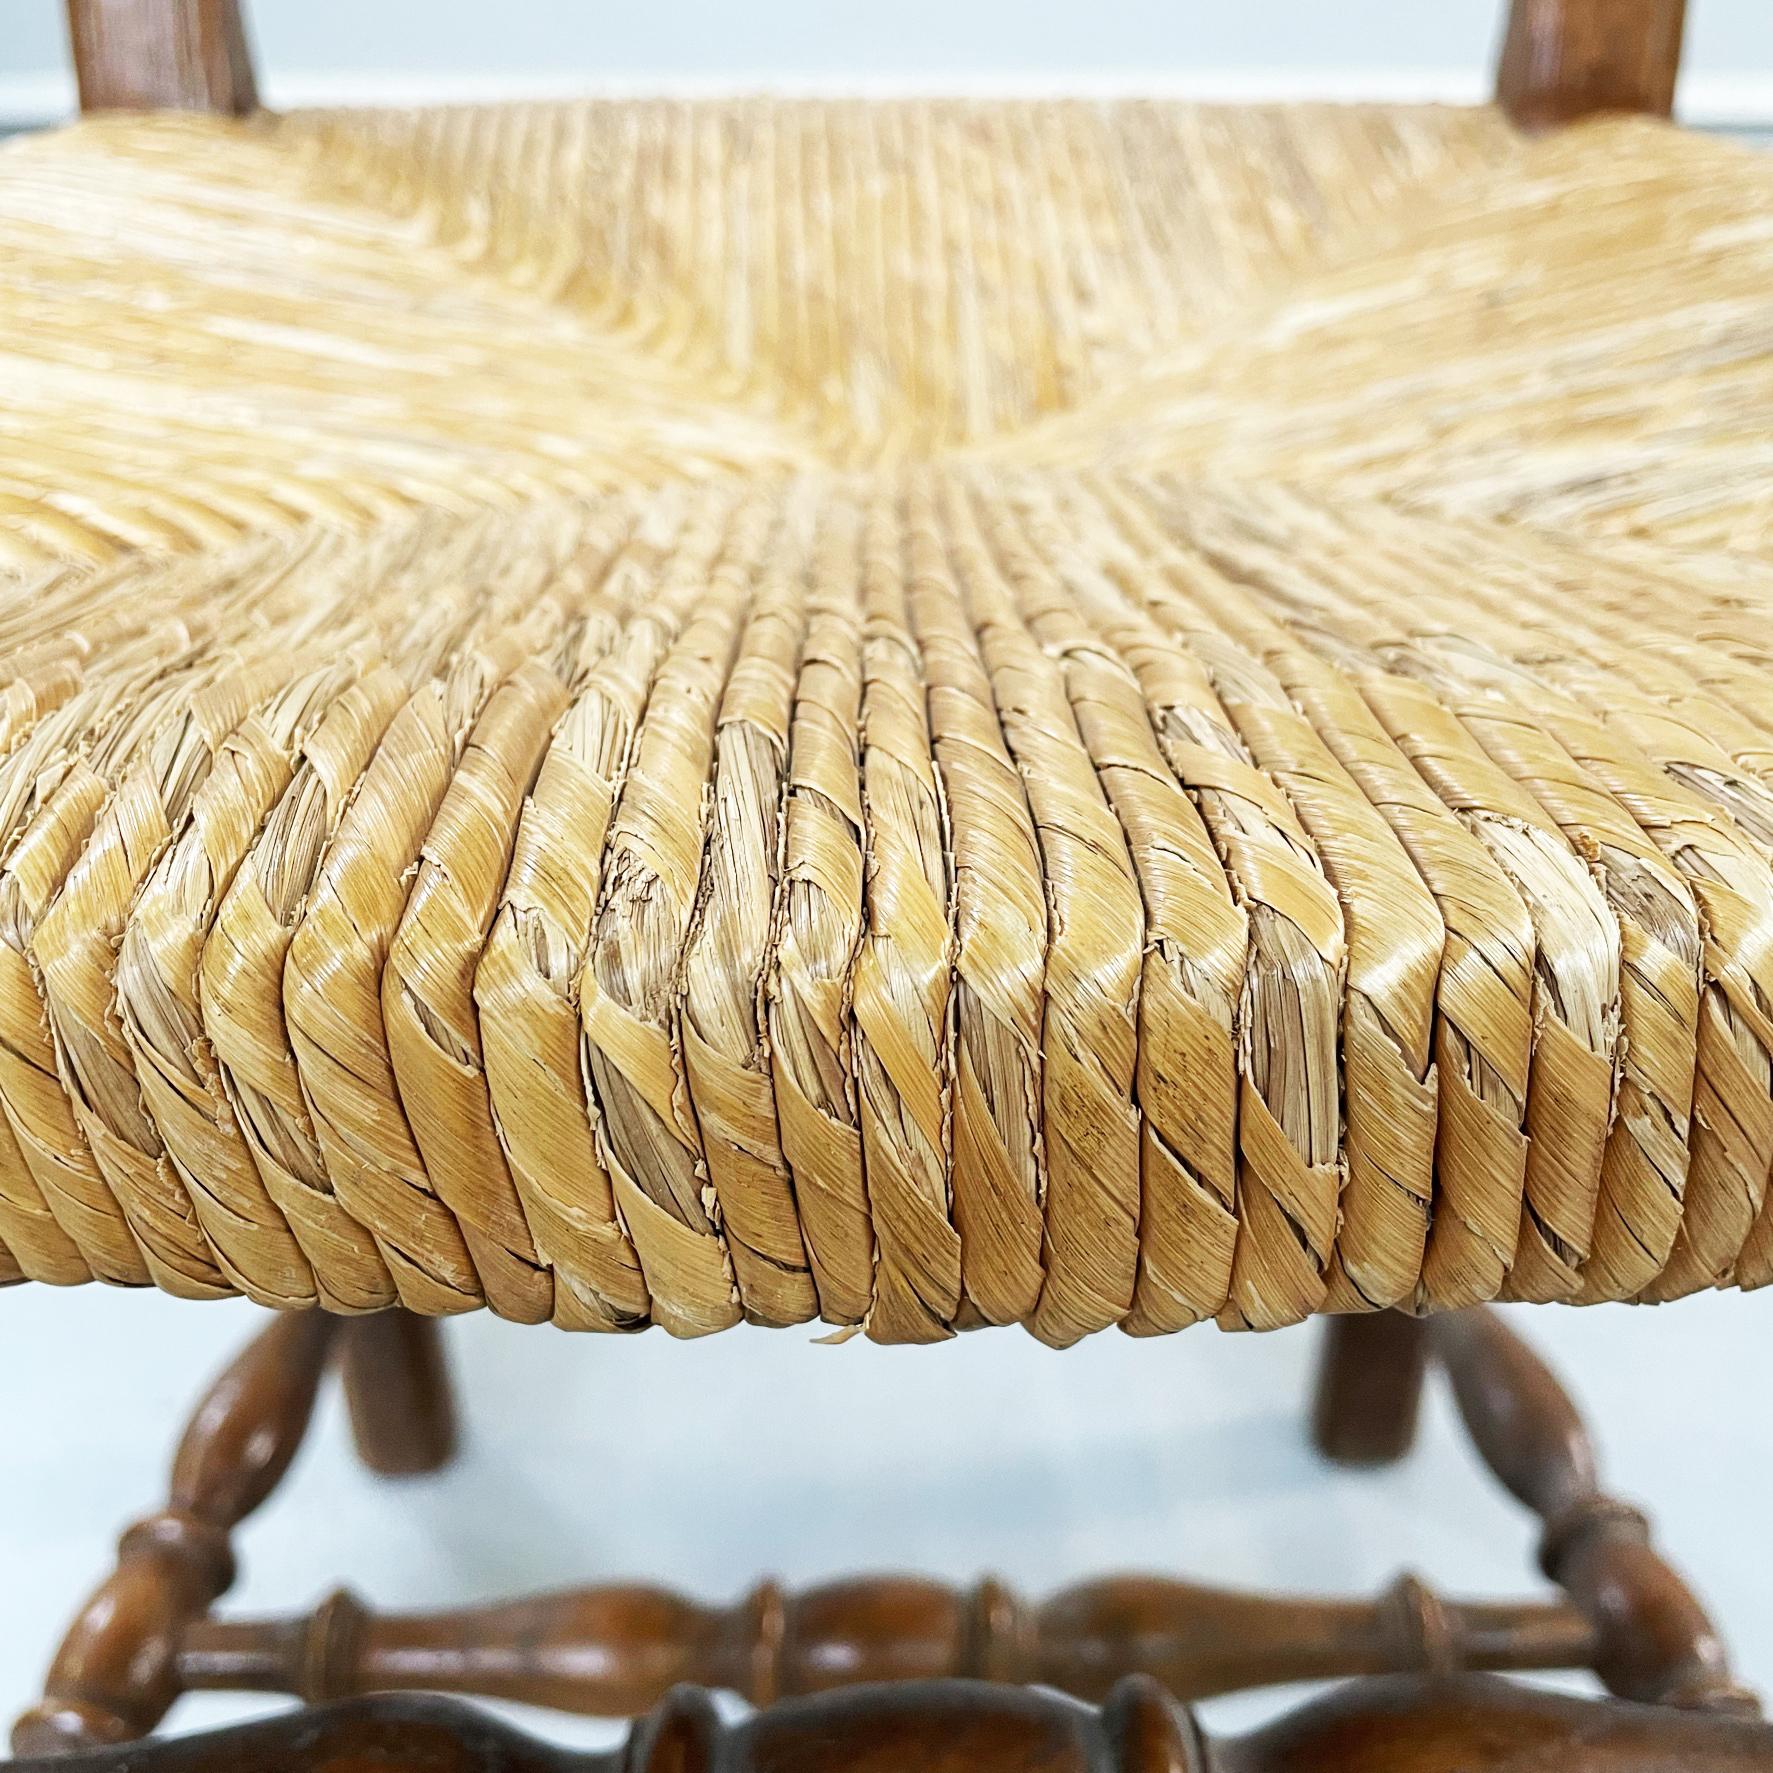 Italian Nineteenth Century Finely Crafted Wooden and Straw Chairs, Late1800s For Sale 3